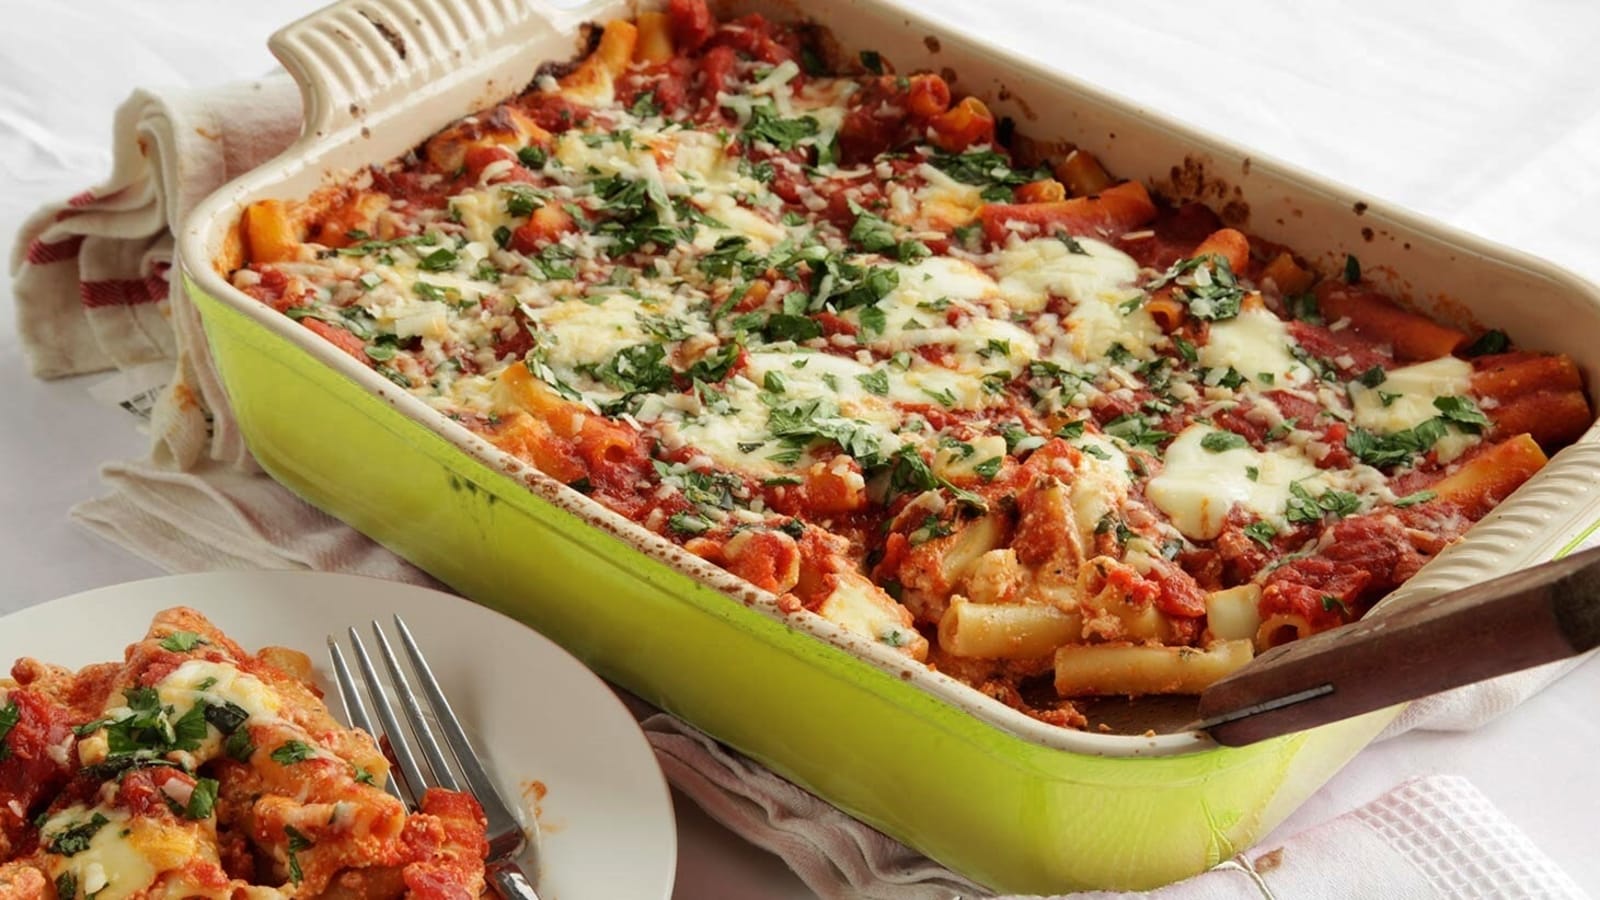 Recipe: Make restaurant-style Baked Cheesy Pasta at home with a health twist